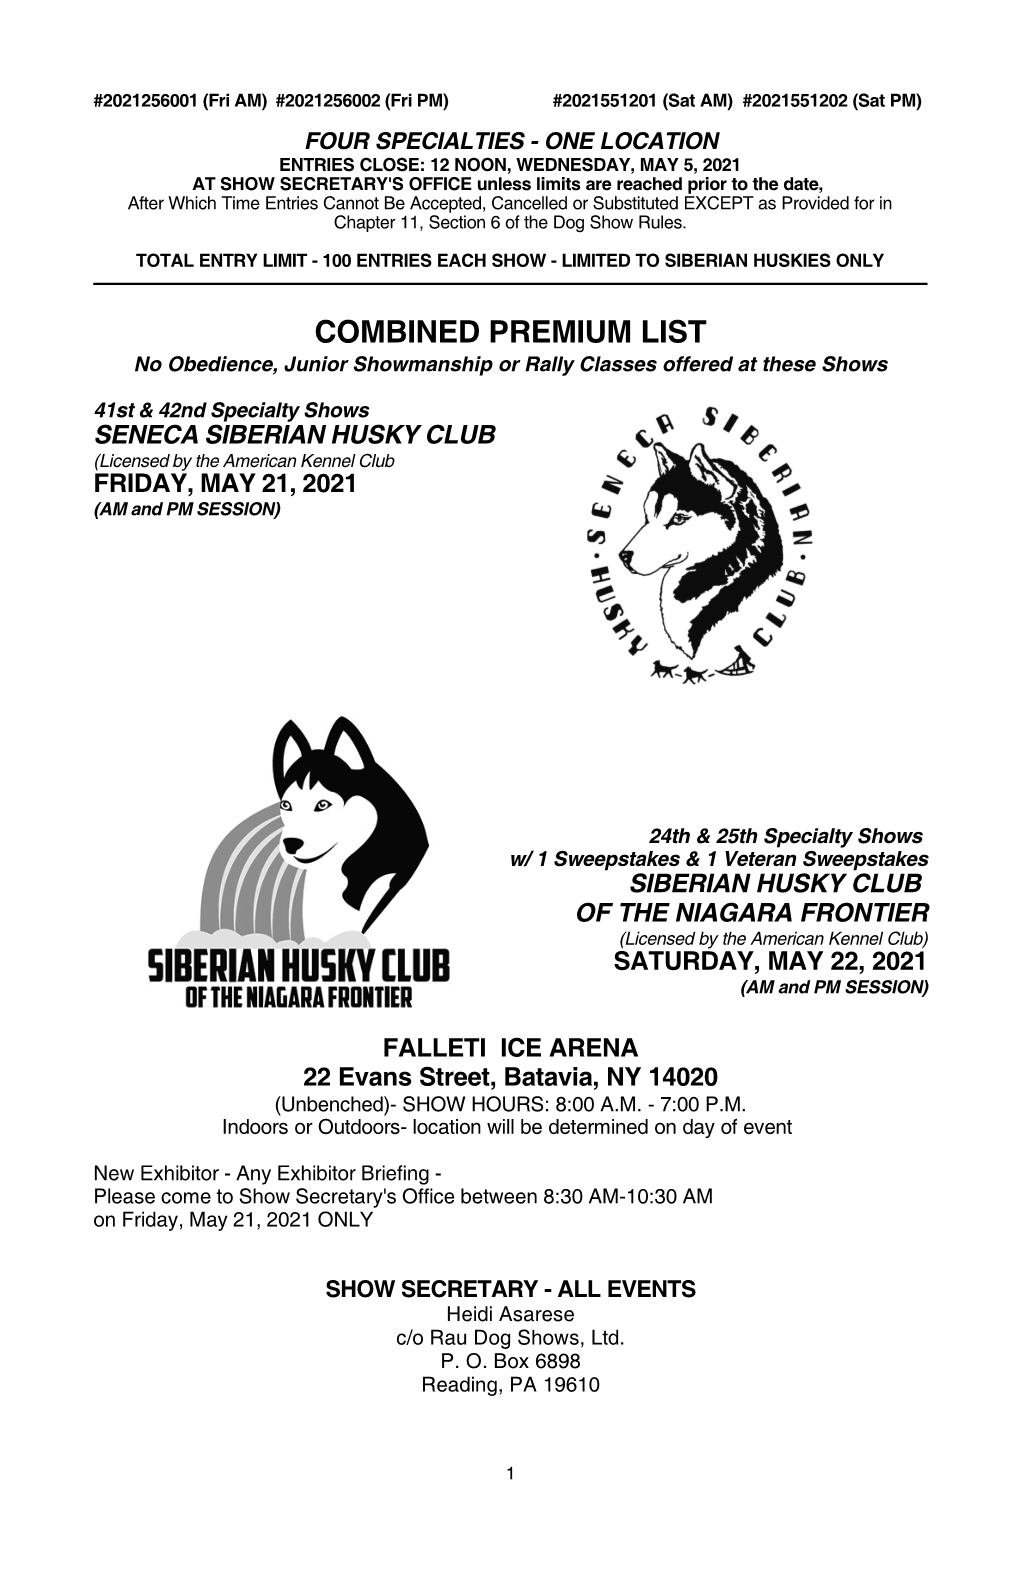 COMBINED PREMIUM LIST No Obedience, Junior Showmanship Or Rally Classes Offered at These Shows